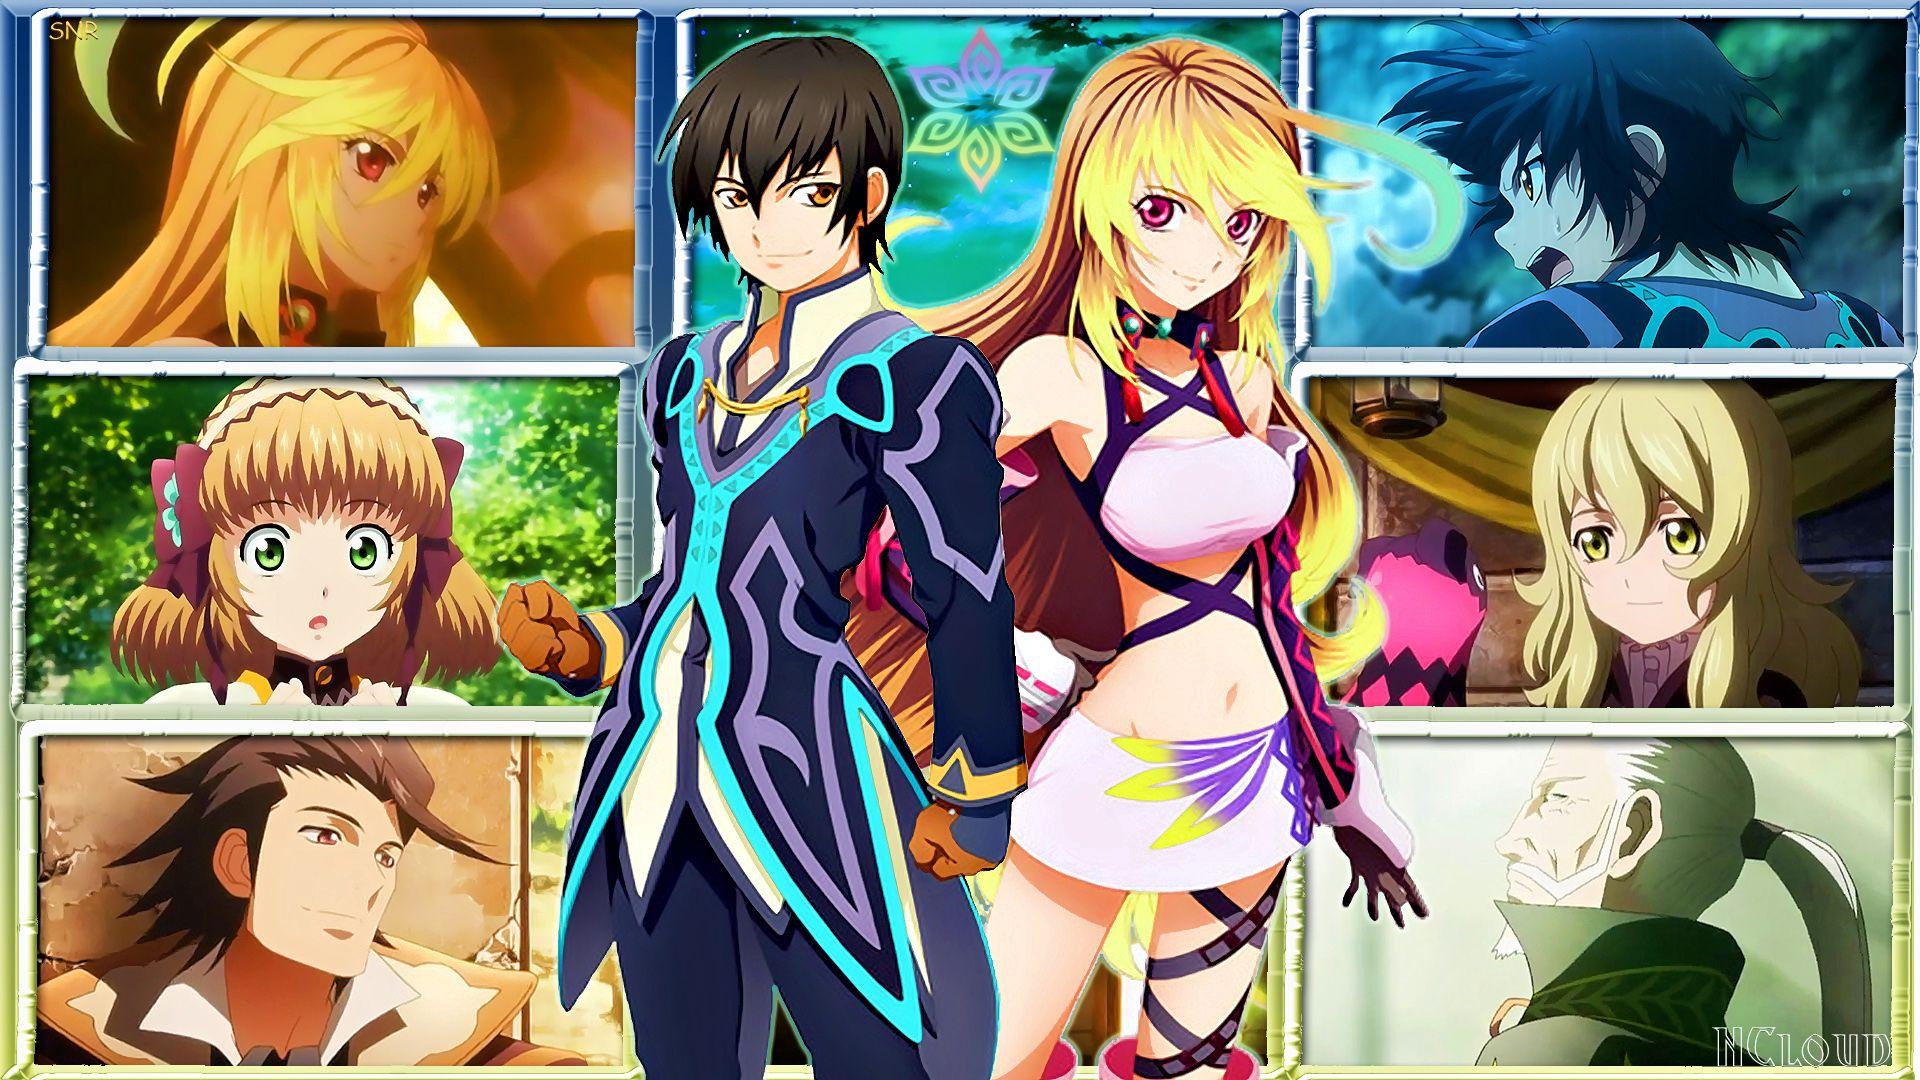 Games Movies Music Anime: My Tales of Xillia HD, PS3 Wallpaper